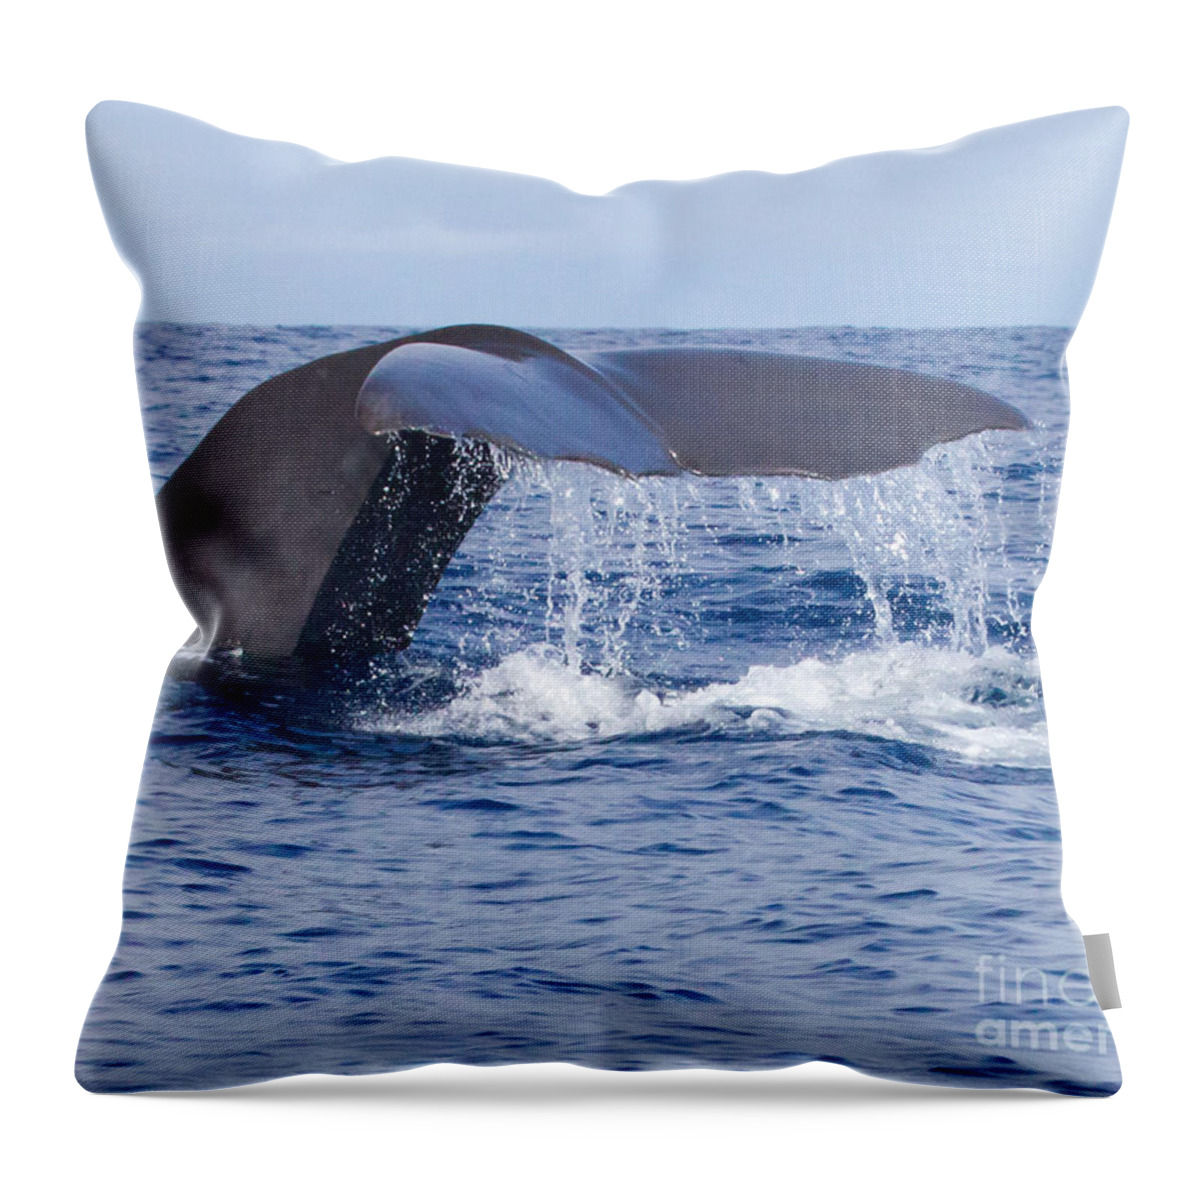 Sperm Whale Throw Pillow featuring the photograph Sperm Whale Tail by Chris Scroggins